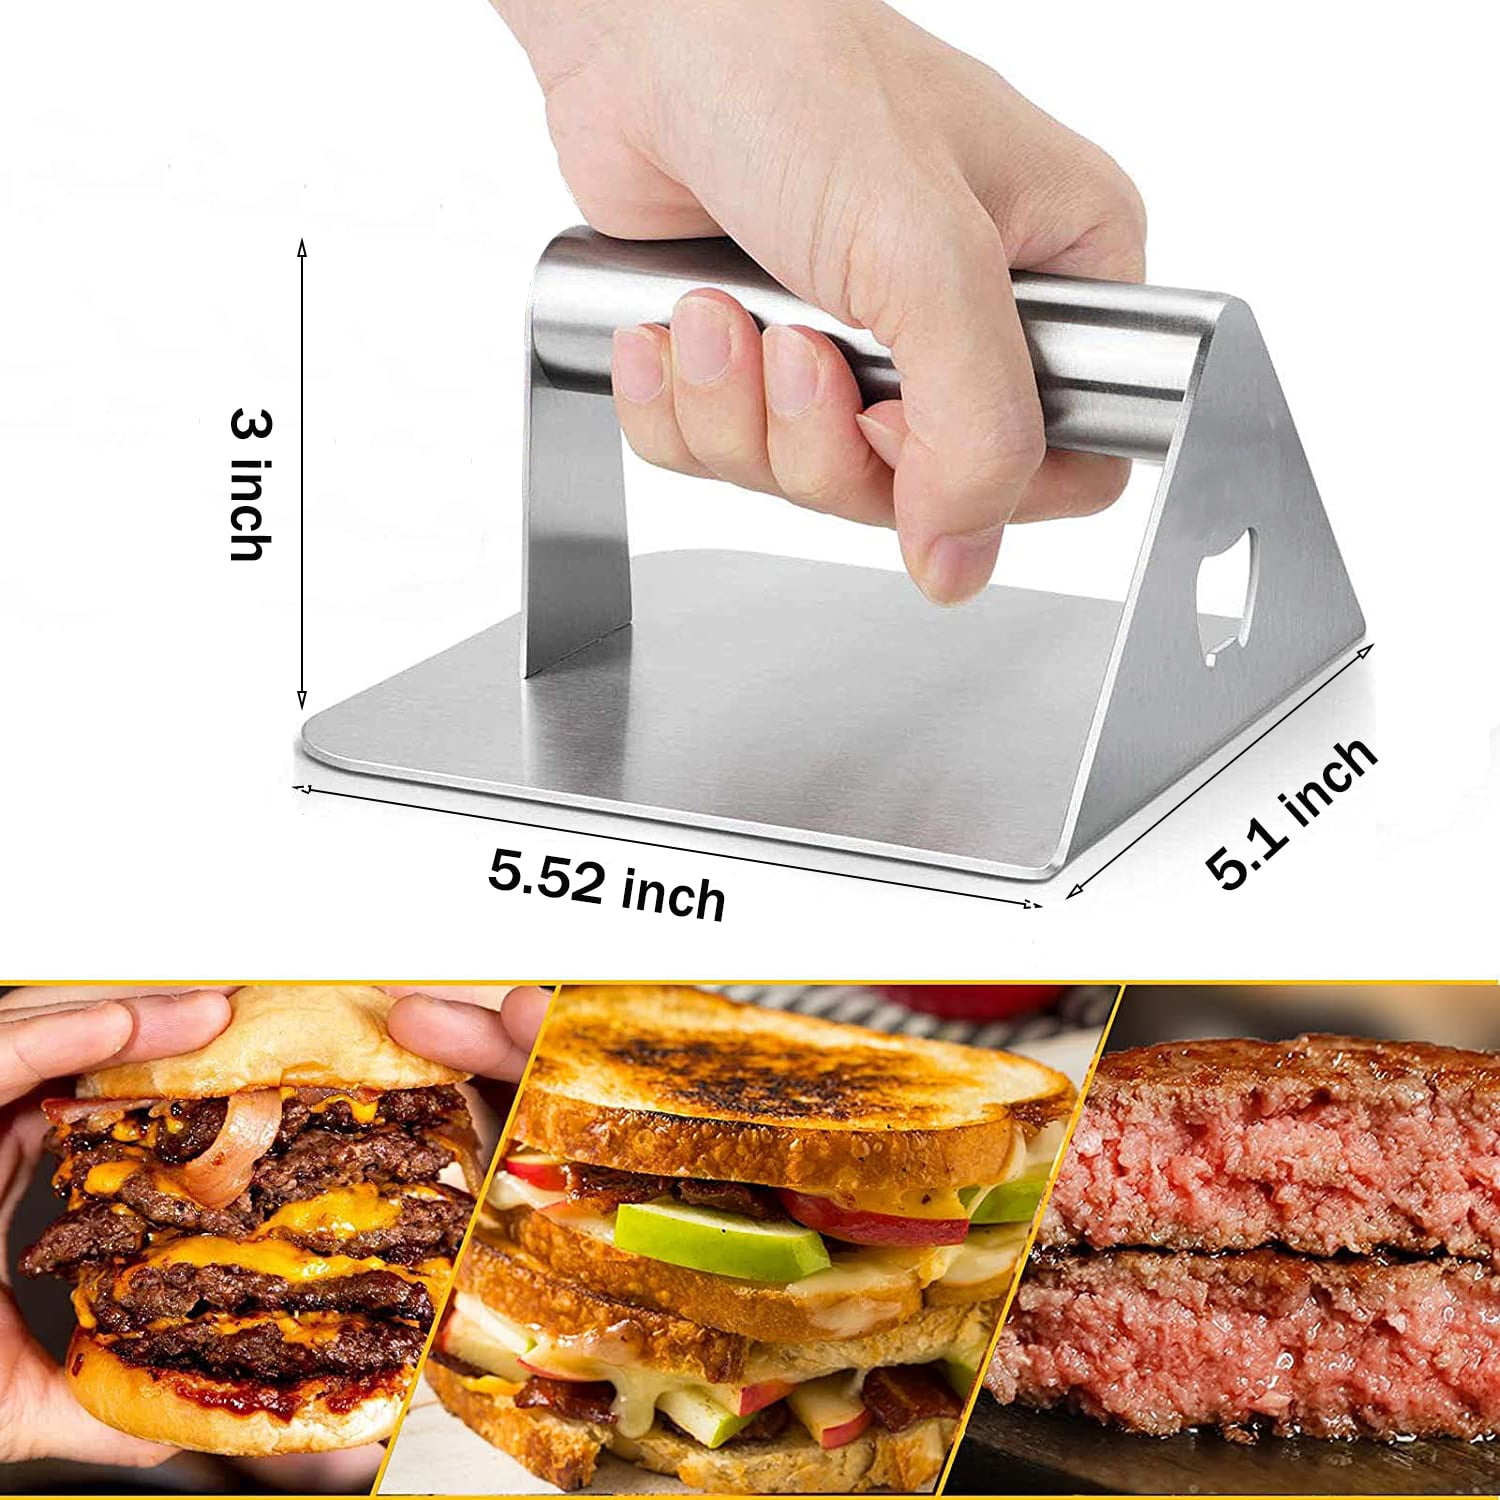 DONPRIX Smash Burger Press Kit with Anti-scald Handle - Stainless Steel Hamburger Press - 5.5 in Round Hamburger Smasher Tool - Burger Smasher for Griddle 